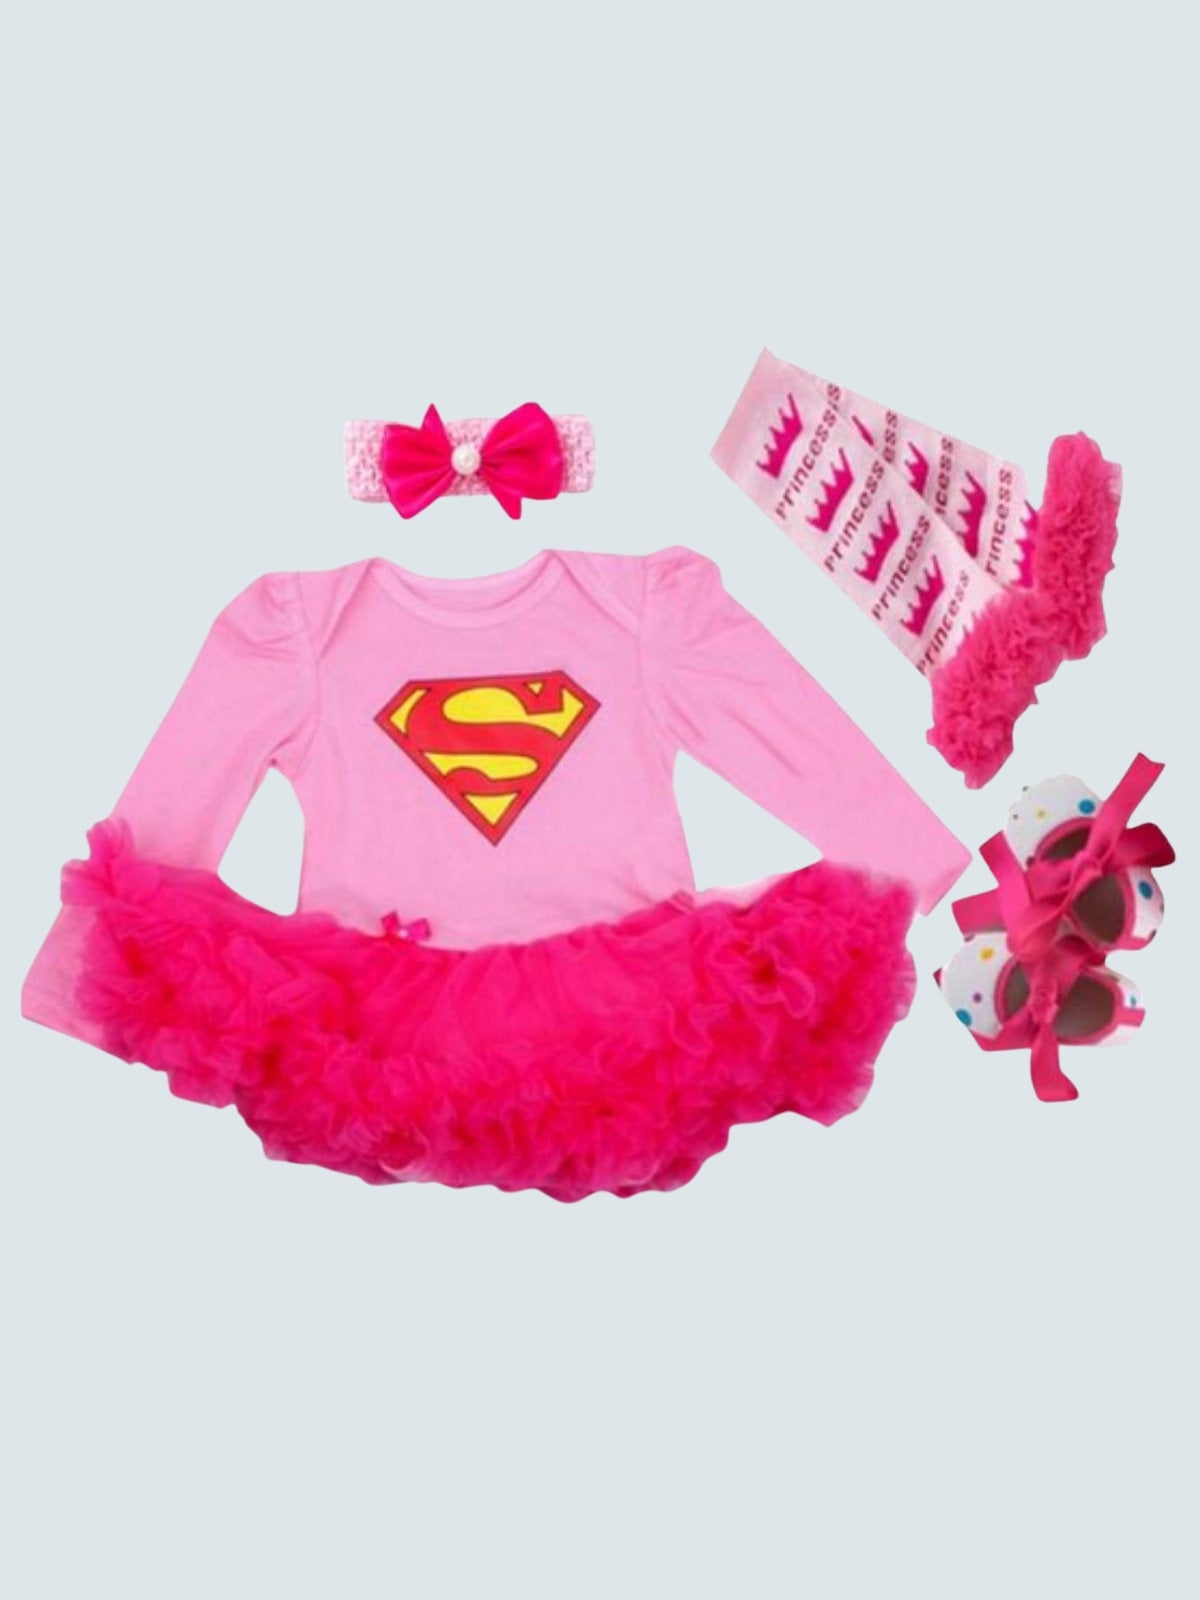 Baby Superwomen Onesie with Matching Socks, Headband, and Shoes